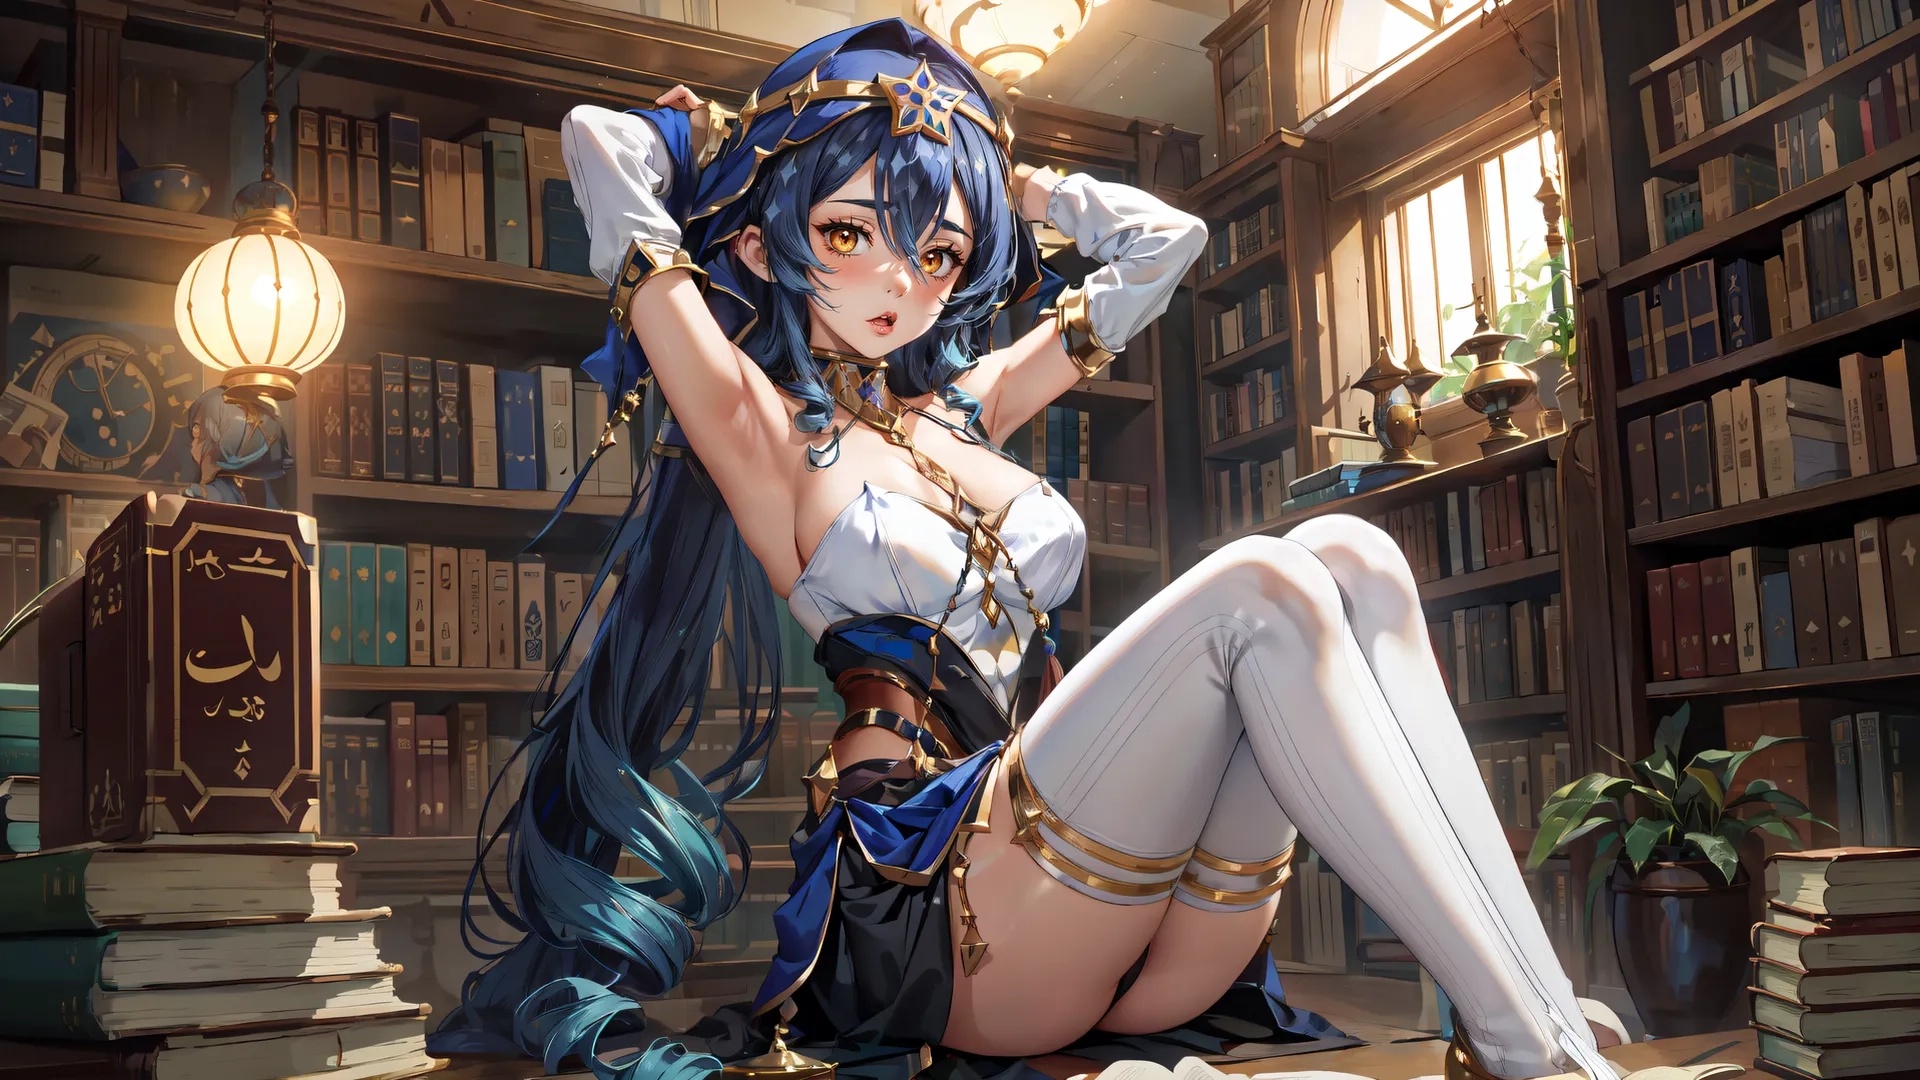 a woman with long hair dressed in blue and white sits in front of books on a table and a man is holding her arms up
